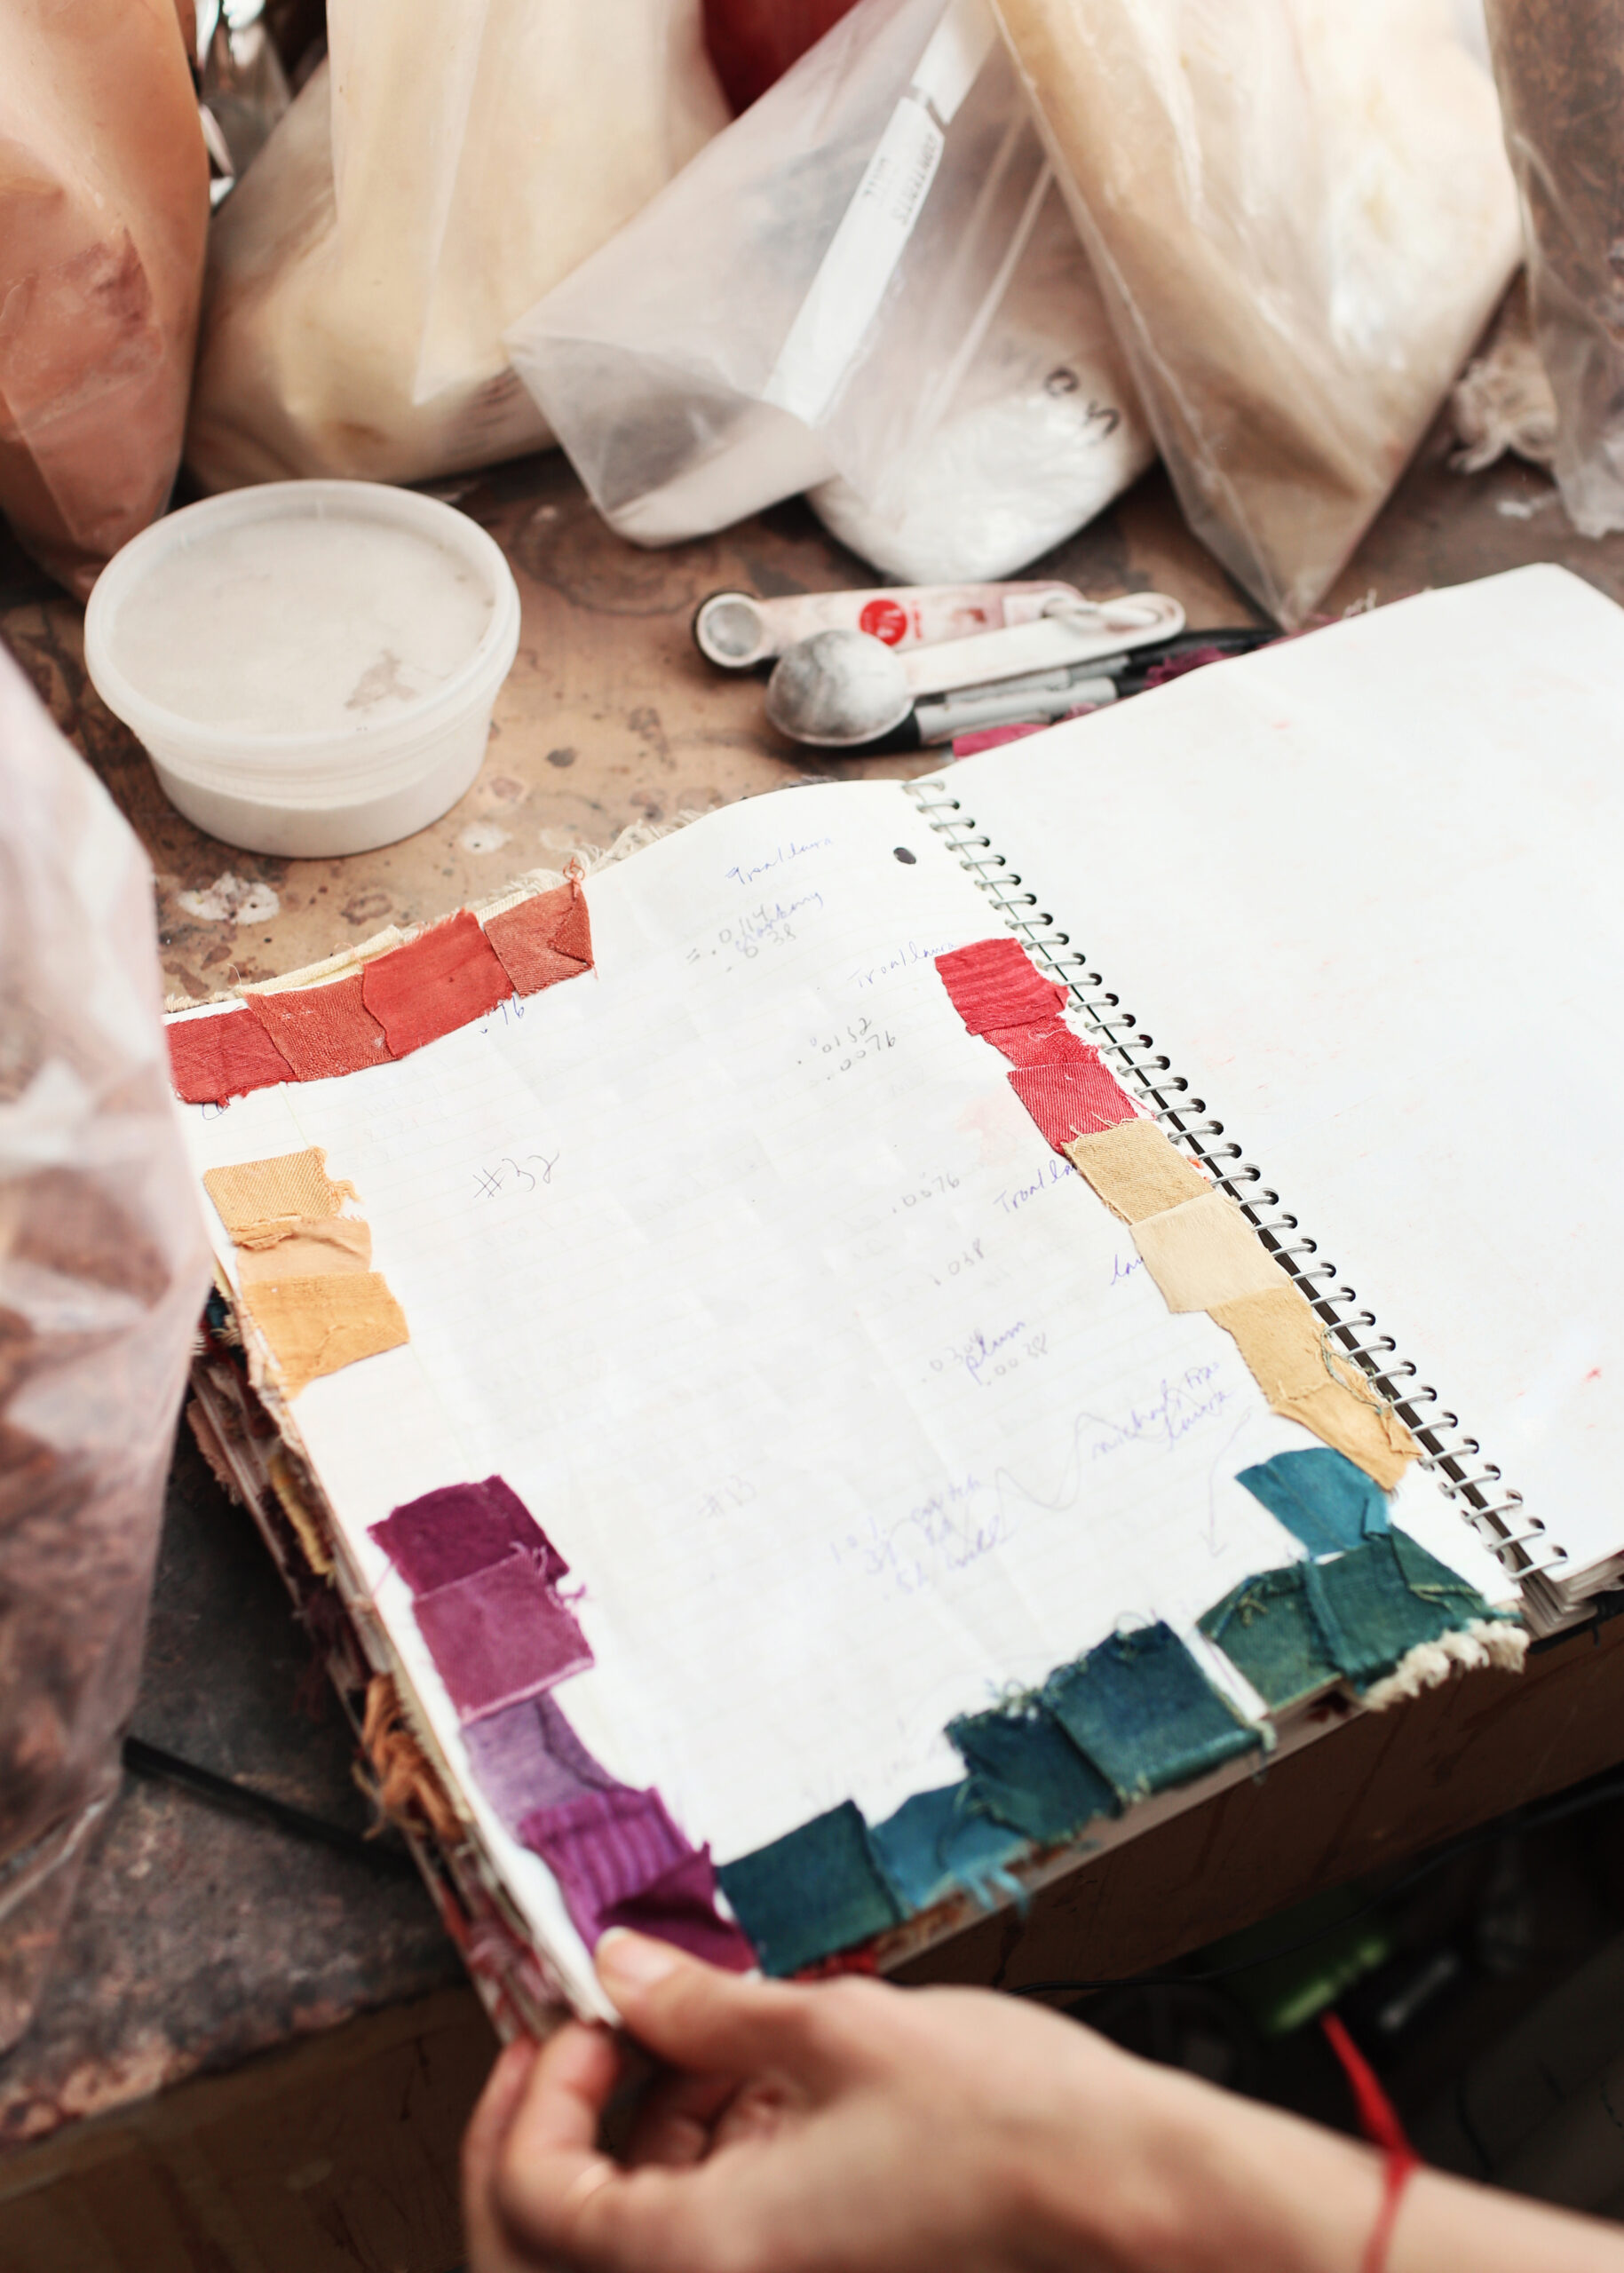 Artisanal detail: Editorial image of dye maker's desk captured by Kimberly Genevieve